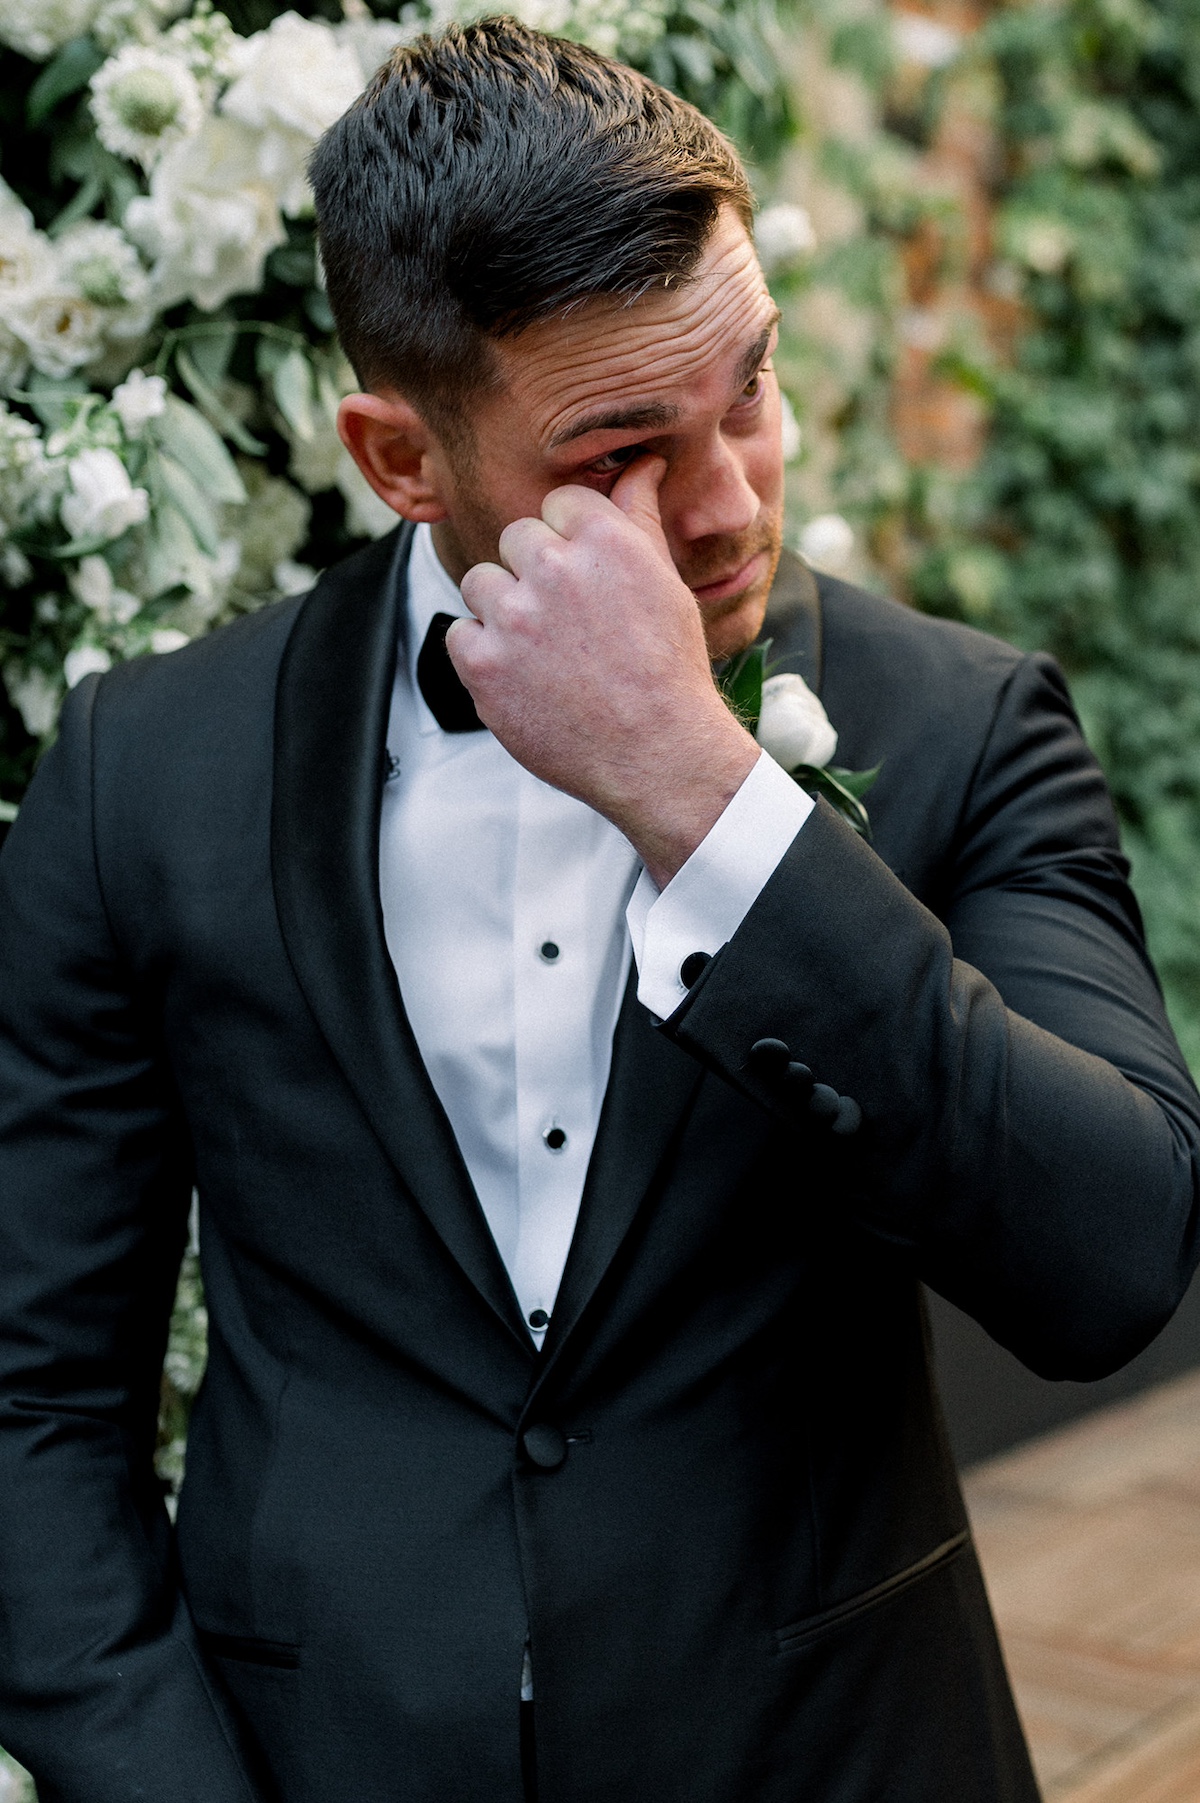 Candid editorial moment capturing the groom's heartfelt reaction to the bride's entrance, a high-end display of genuine emotion.